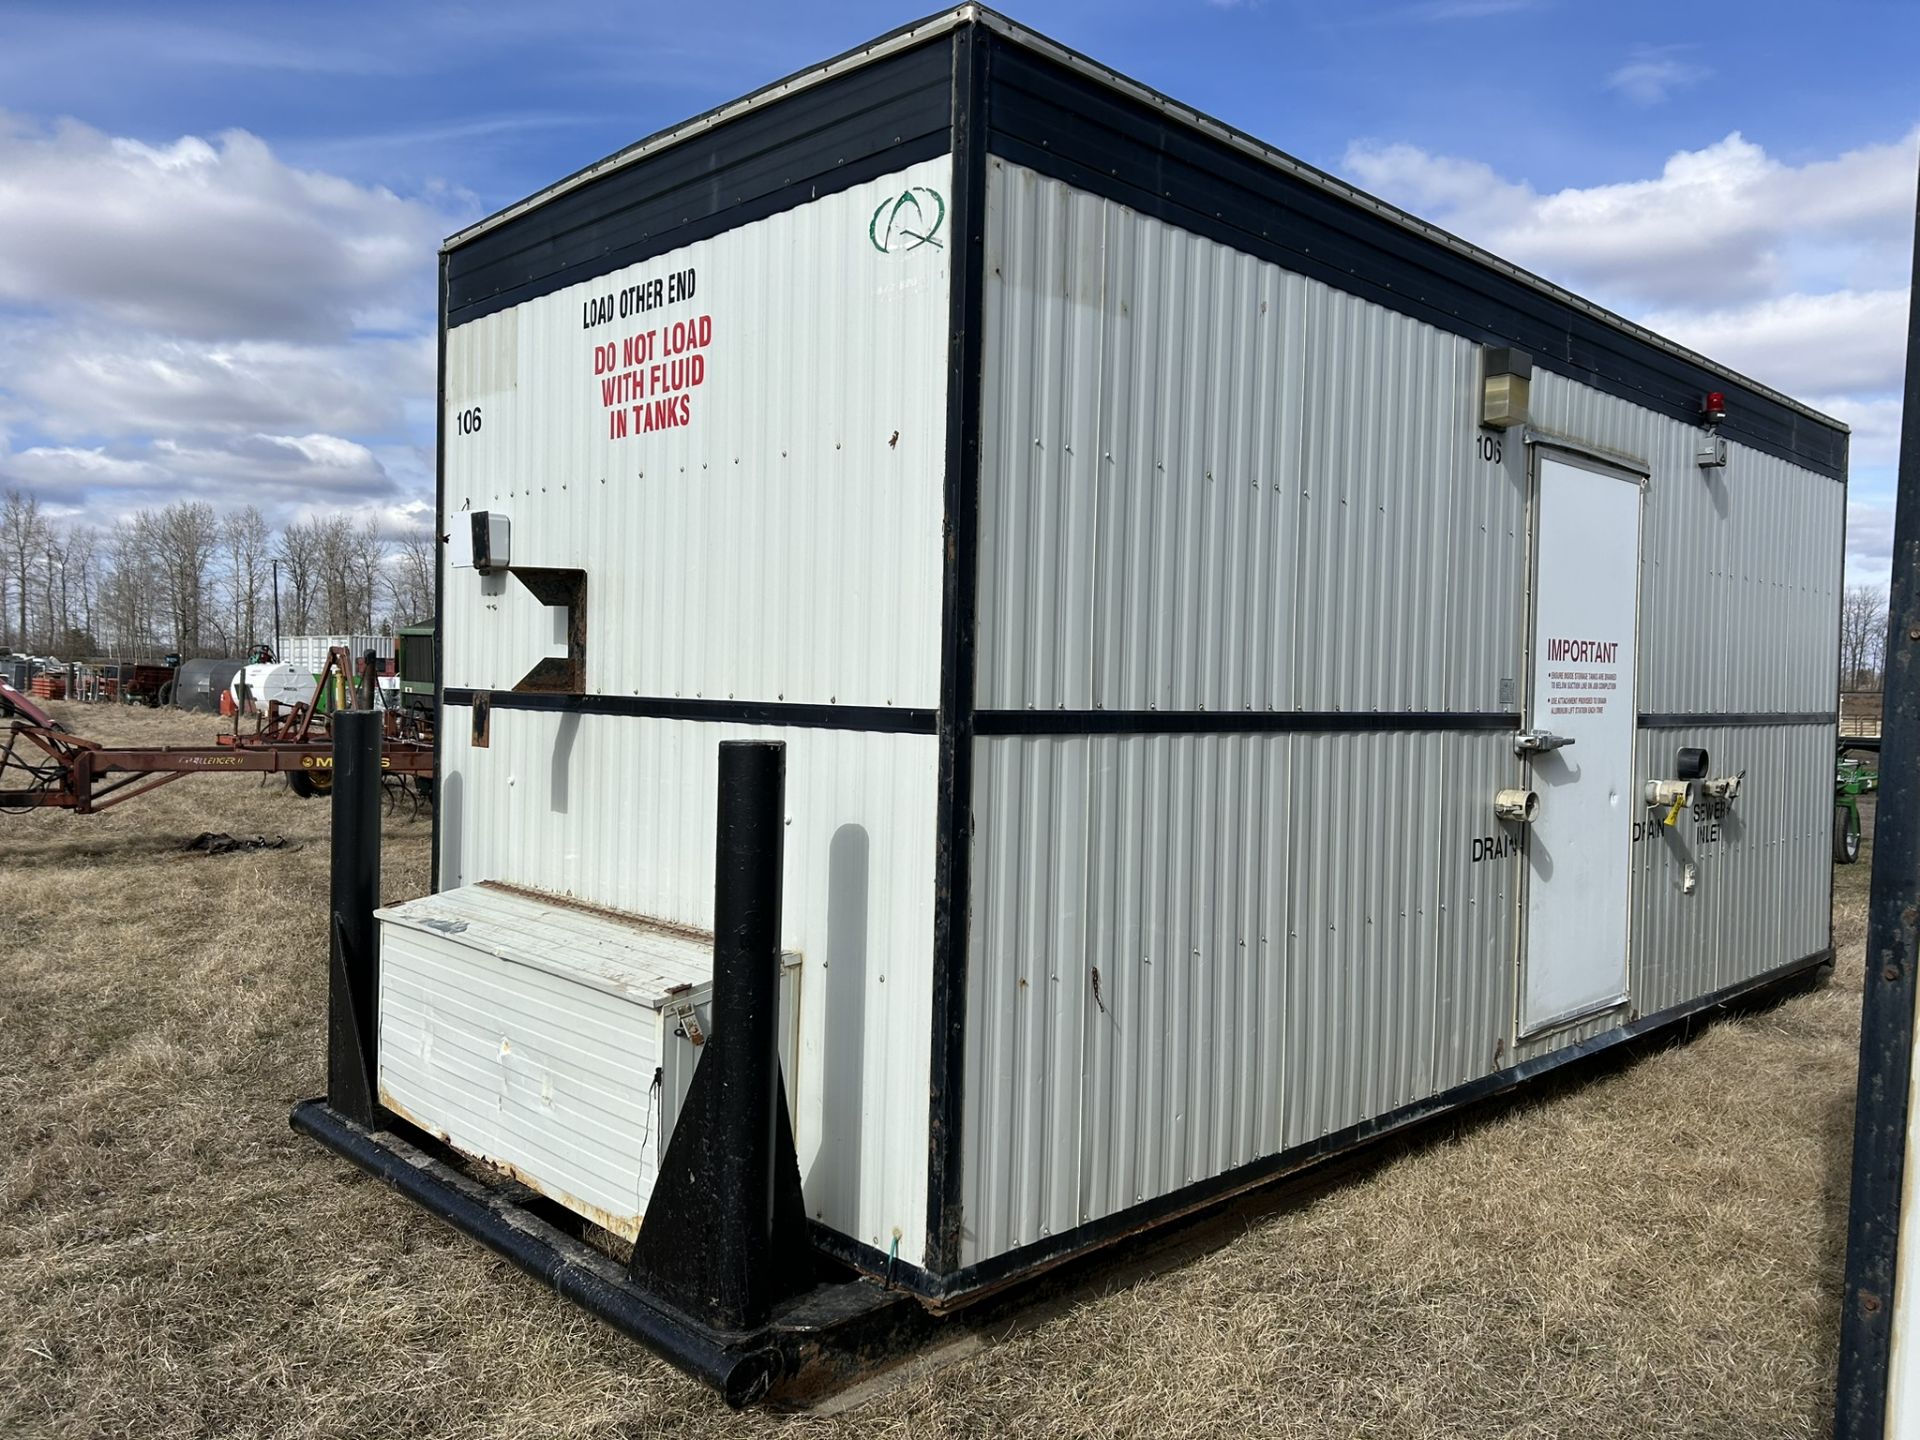 SKIDDED SEWAGE CONTAINMENT BUILDING, HEATED, 13 M3 CAPACITY, 30AMP/1PH, 8'-4"X23'X9' H, S/N